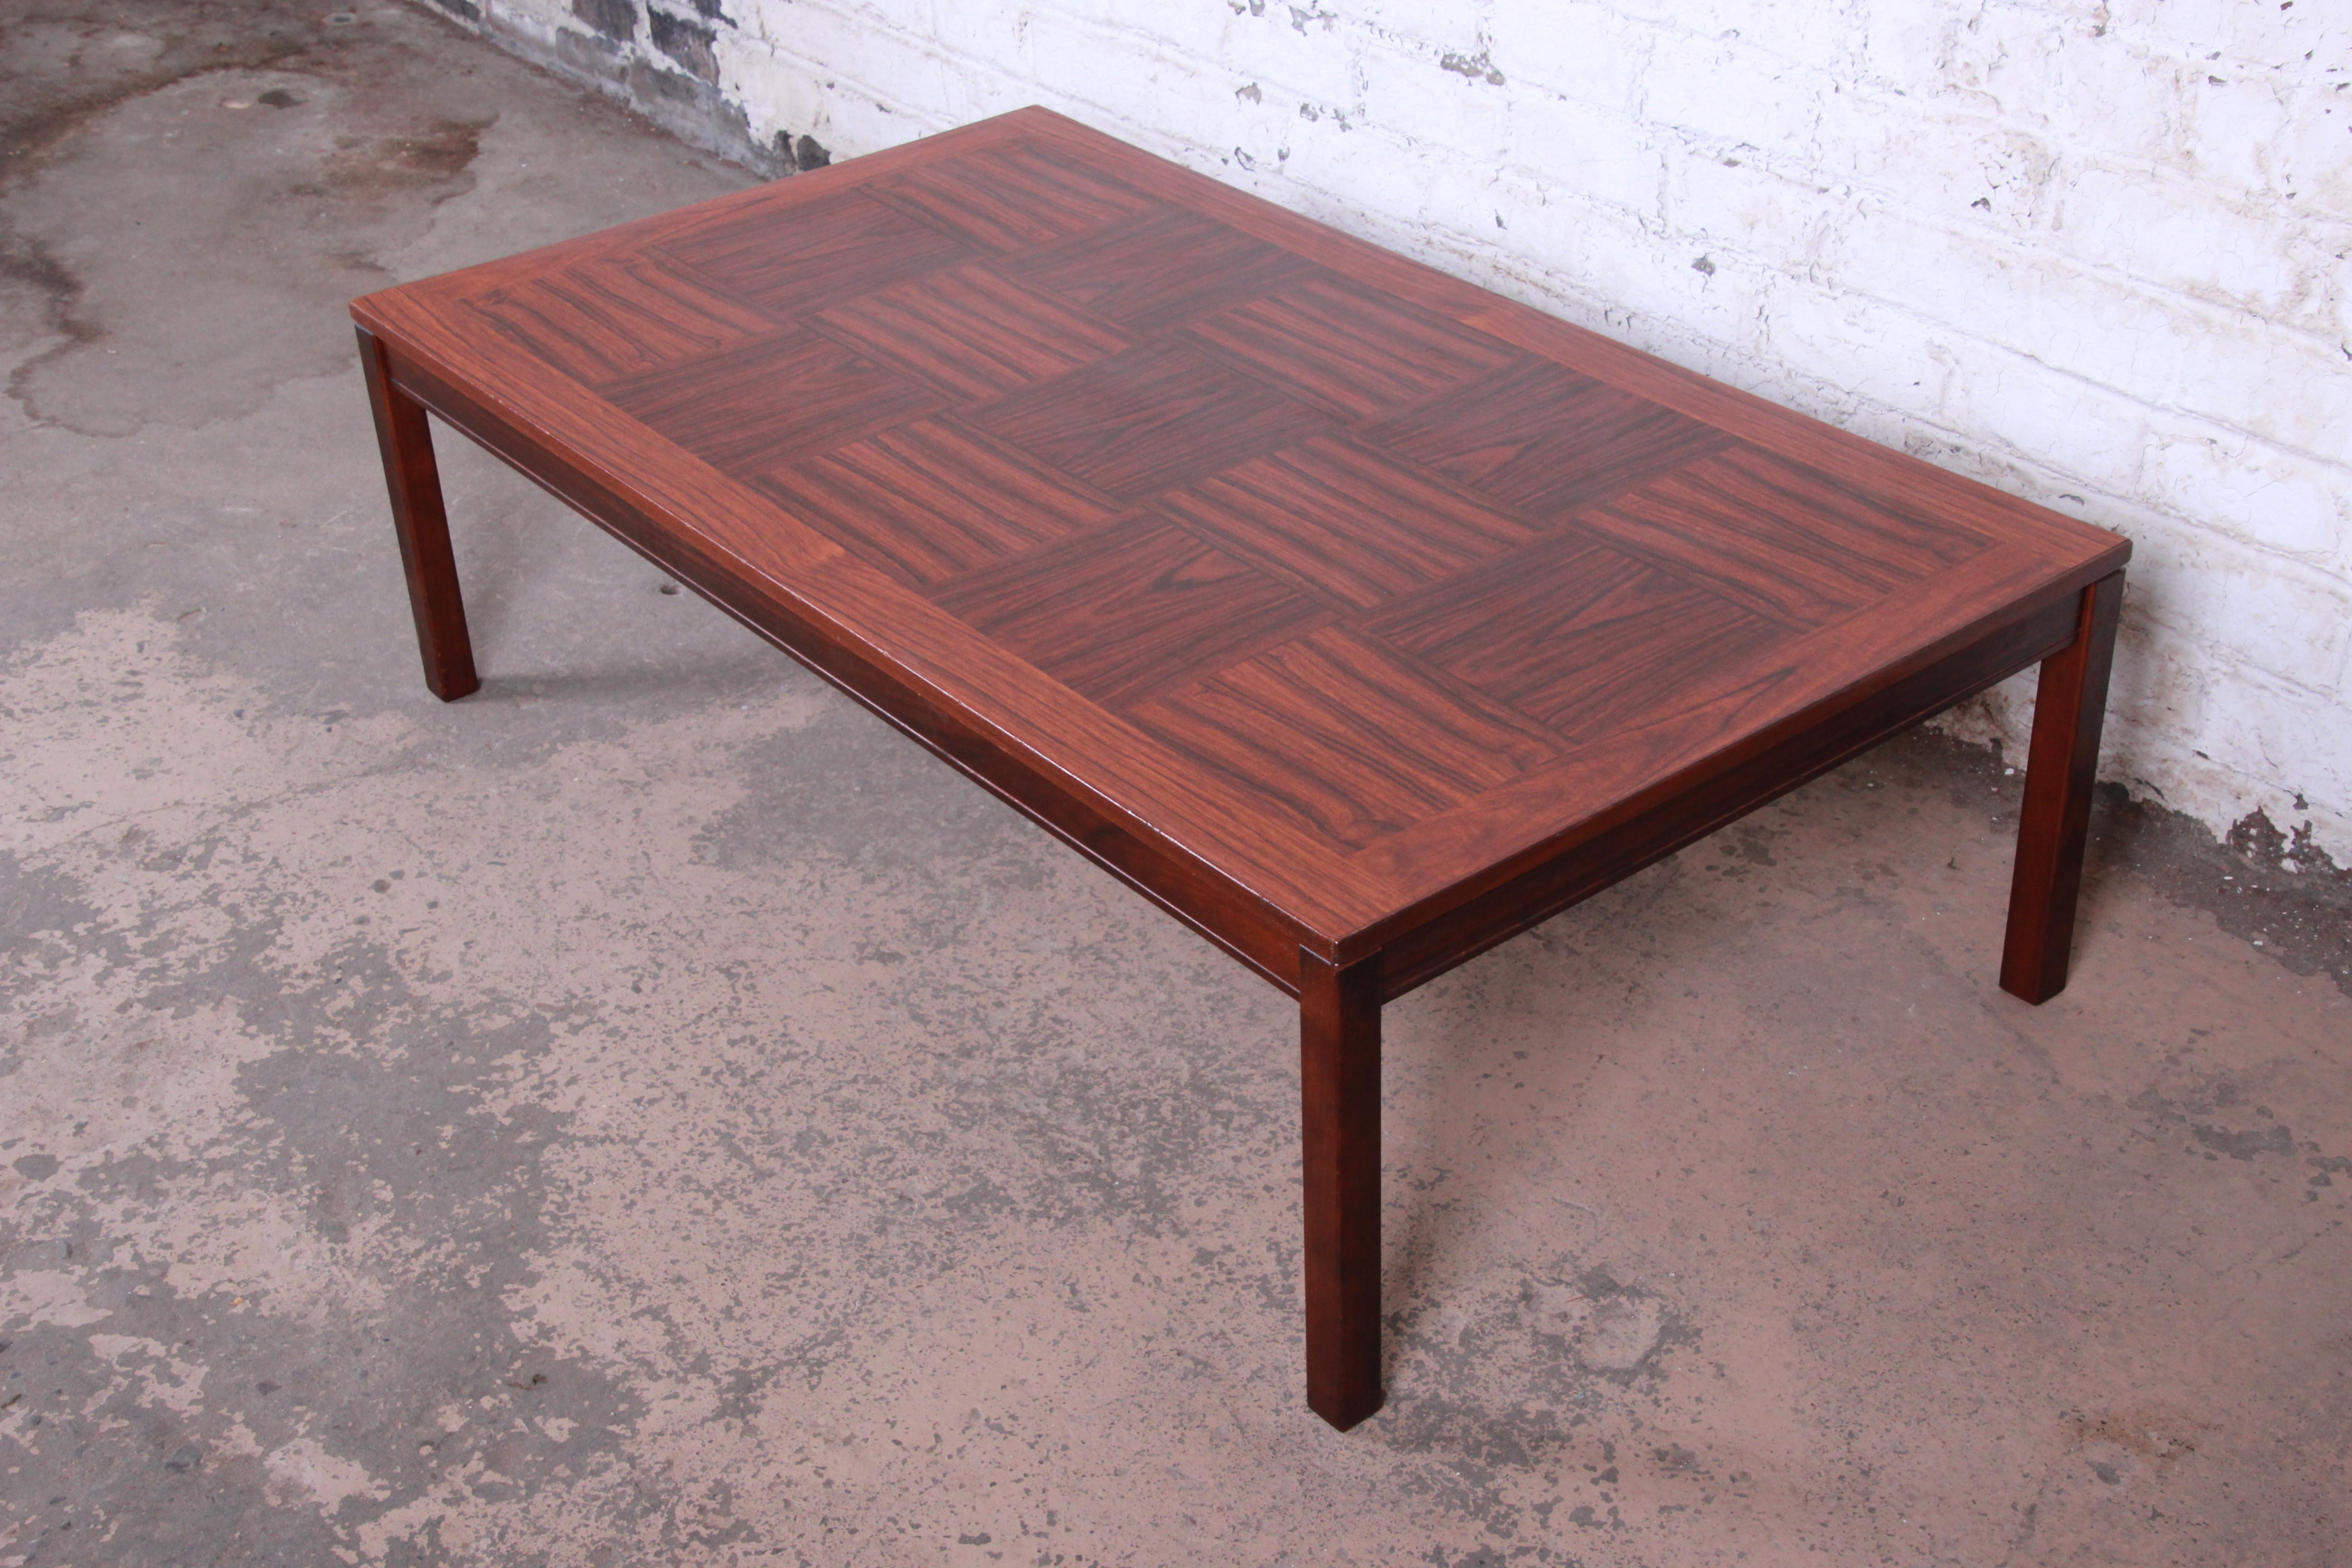 A stunning Mid-Century Modern large rosewood coffee table by P. S. Heggen. The table features gorgeous rosewood grain in a checkerboard design. It has clean, simple lines--an excellent example of Scandinavian design. Made in Norway by P.S. Heggen,